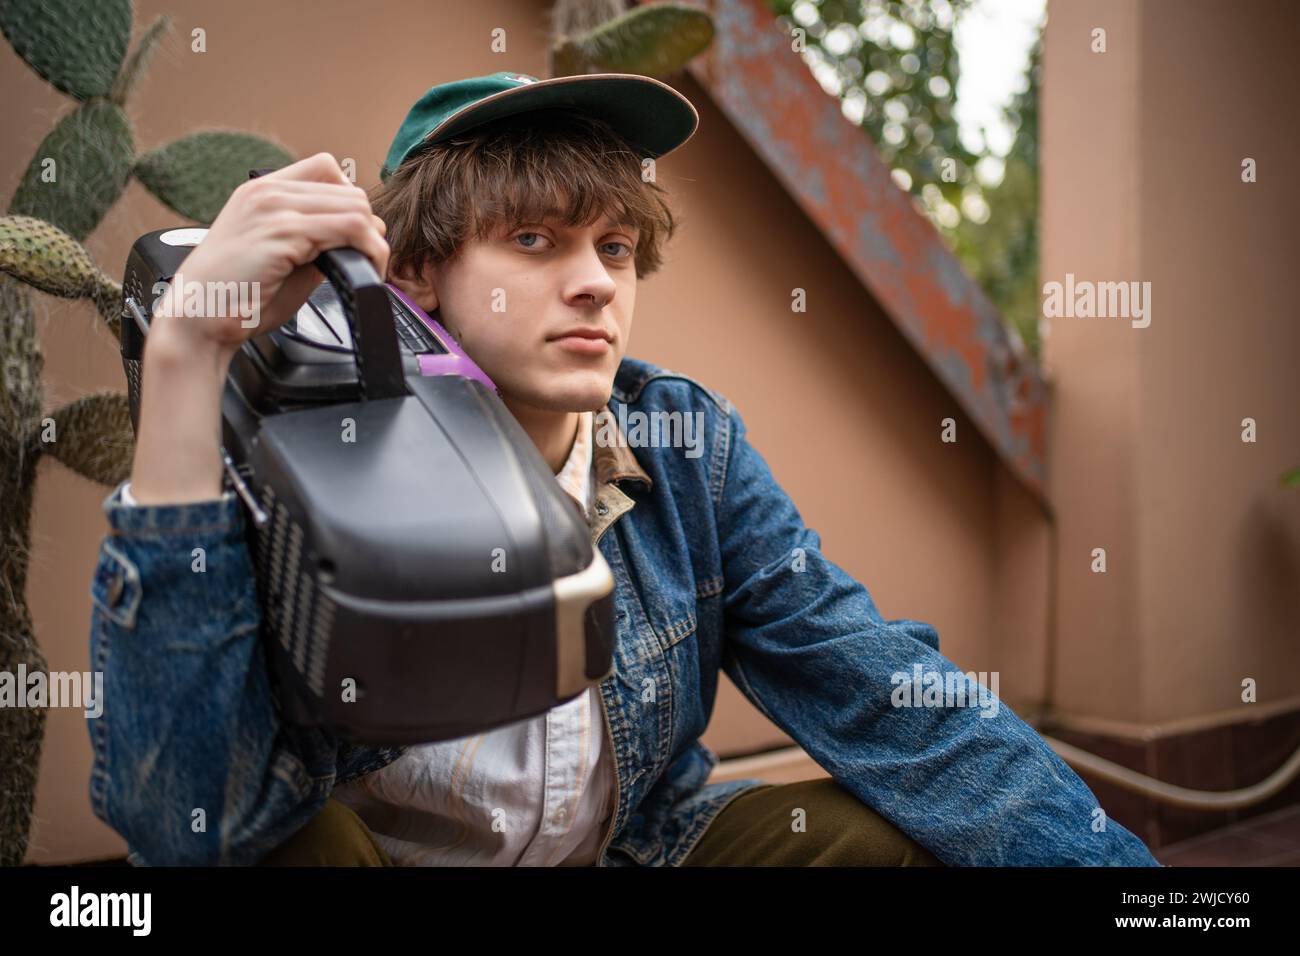 Portrait of young relaxed man looking at camera. His clothes and accessories reflect style of the 90s. Cassette player is nostalgic element that adds retro charm to photo. Stock Photo